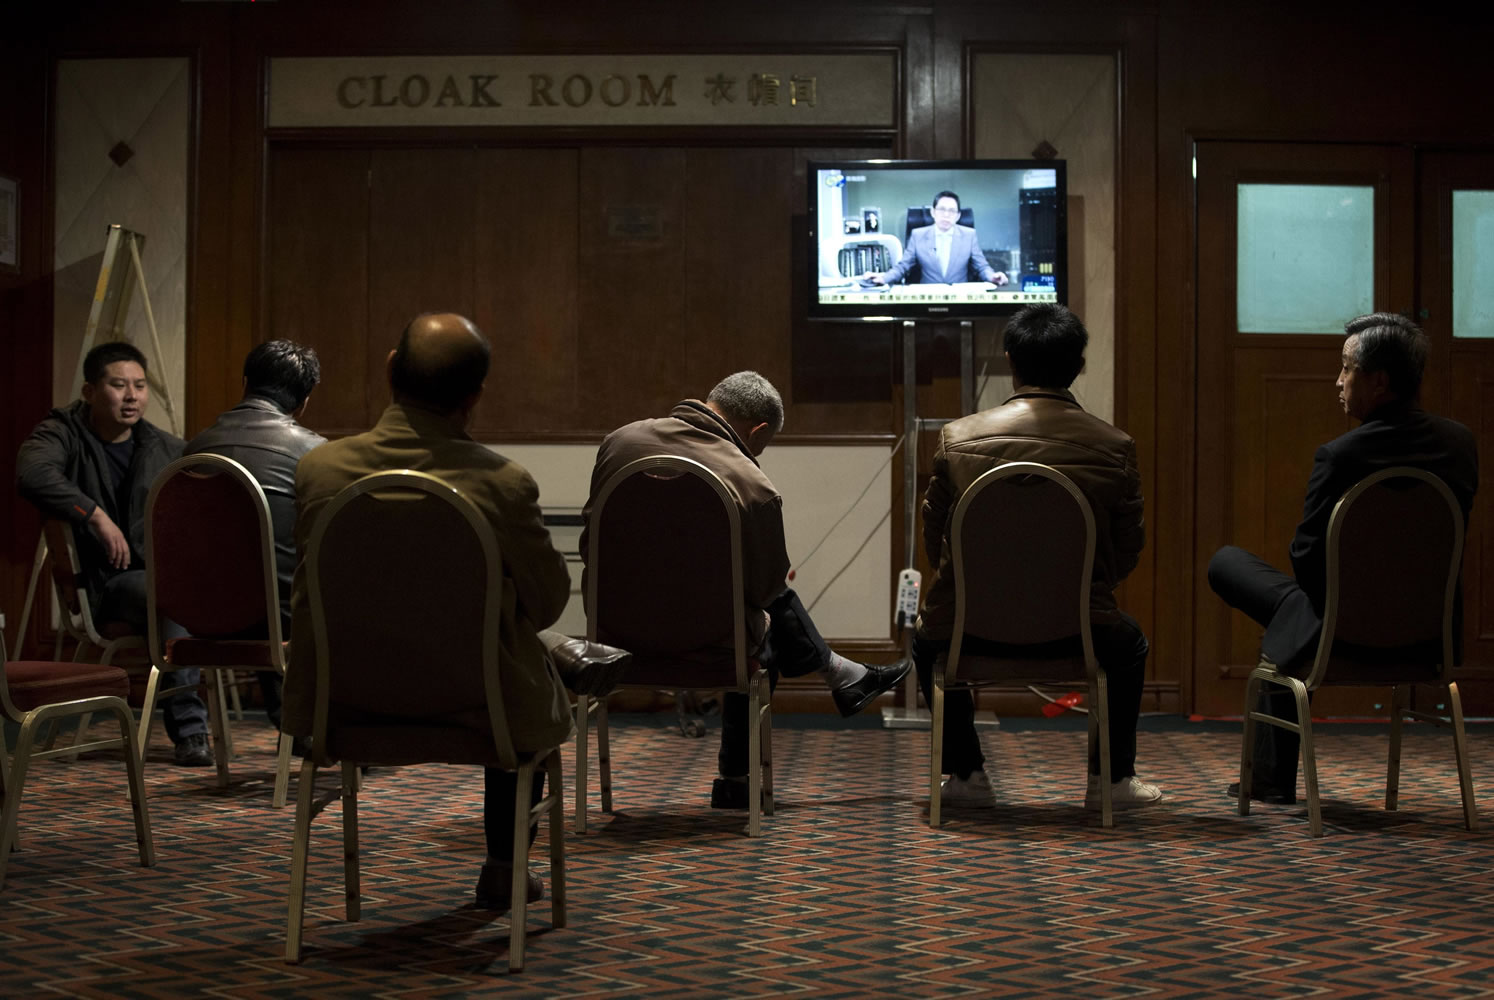 Relatives of Chinese passengers aboard the missing Malaysia Airlines flight watch a TV news program about the plane at a hotel ballroom in Beijing on Thursday.